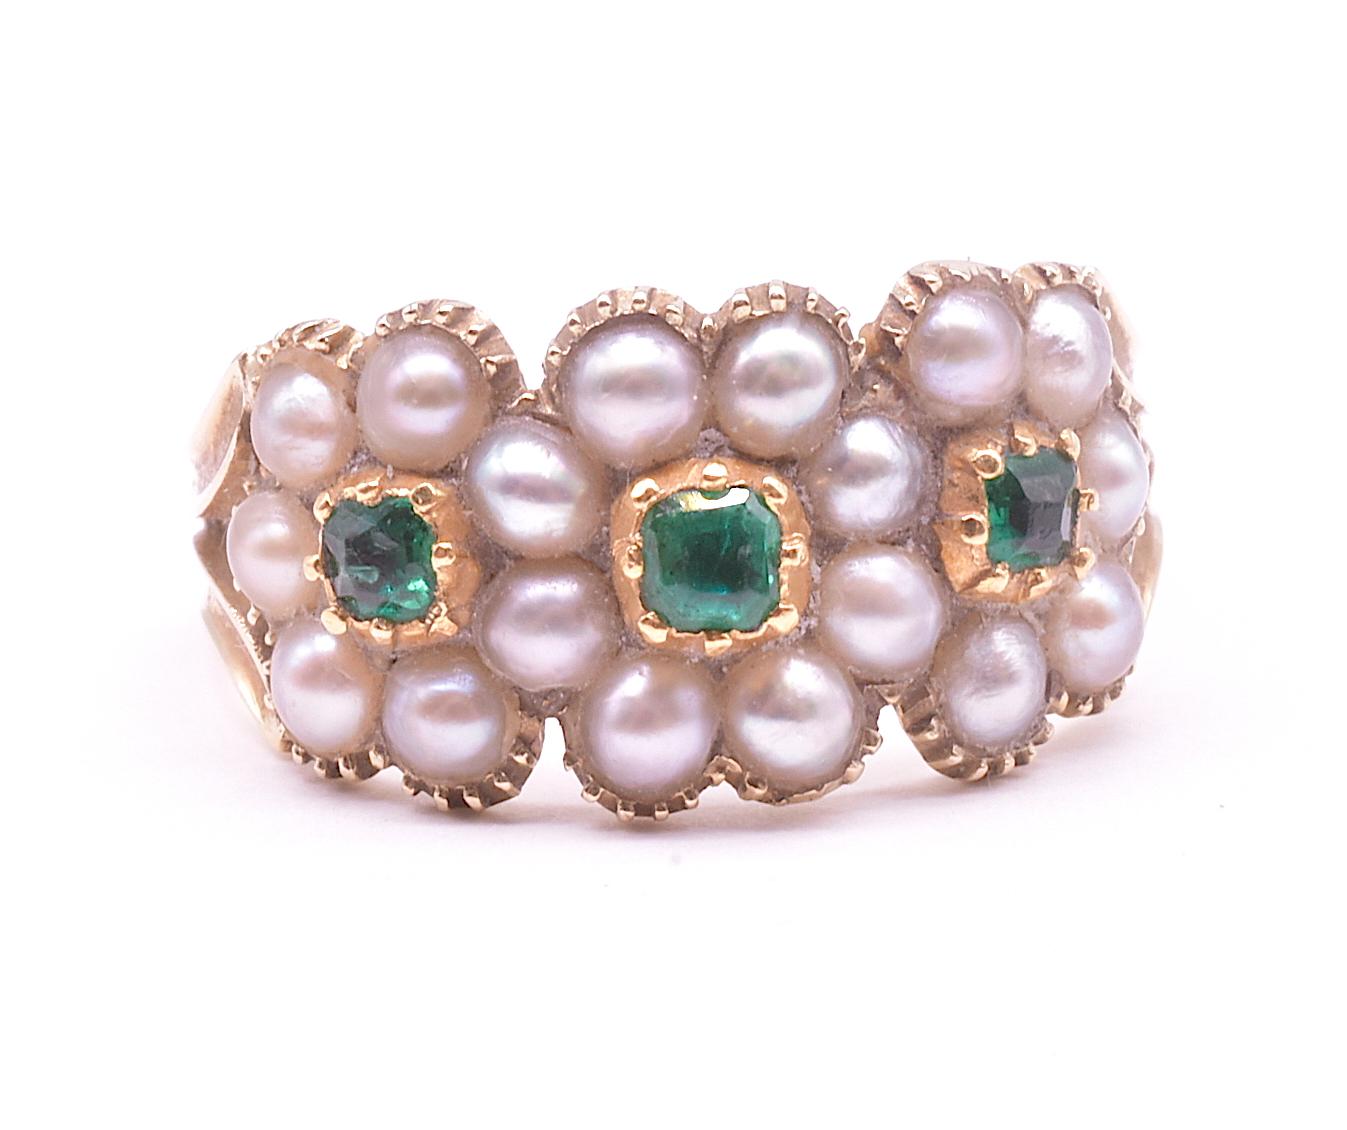 Wonderful early 19th century Gaorgian  ring that features three overlapping daisy clusters composed of seed pearls and flat cut emeralds set with a closed gold back.  The stones are set in classic Georgian crimped settings. The interesting carved